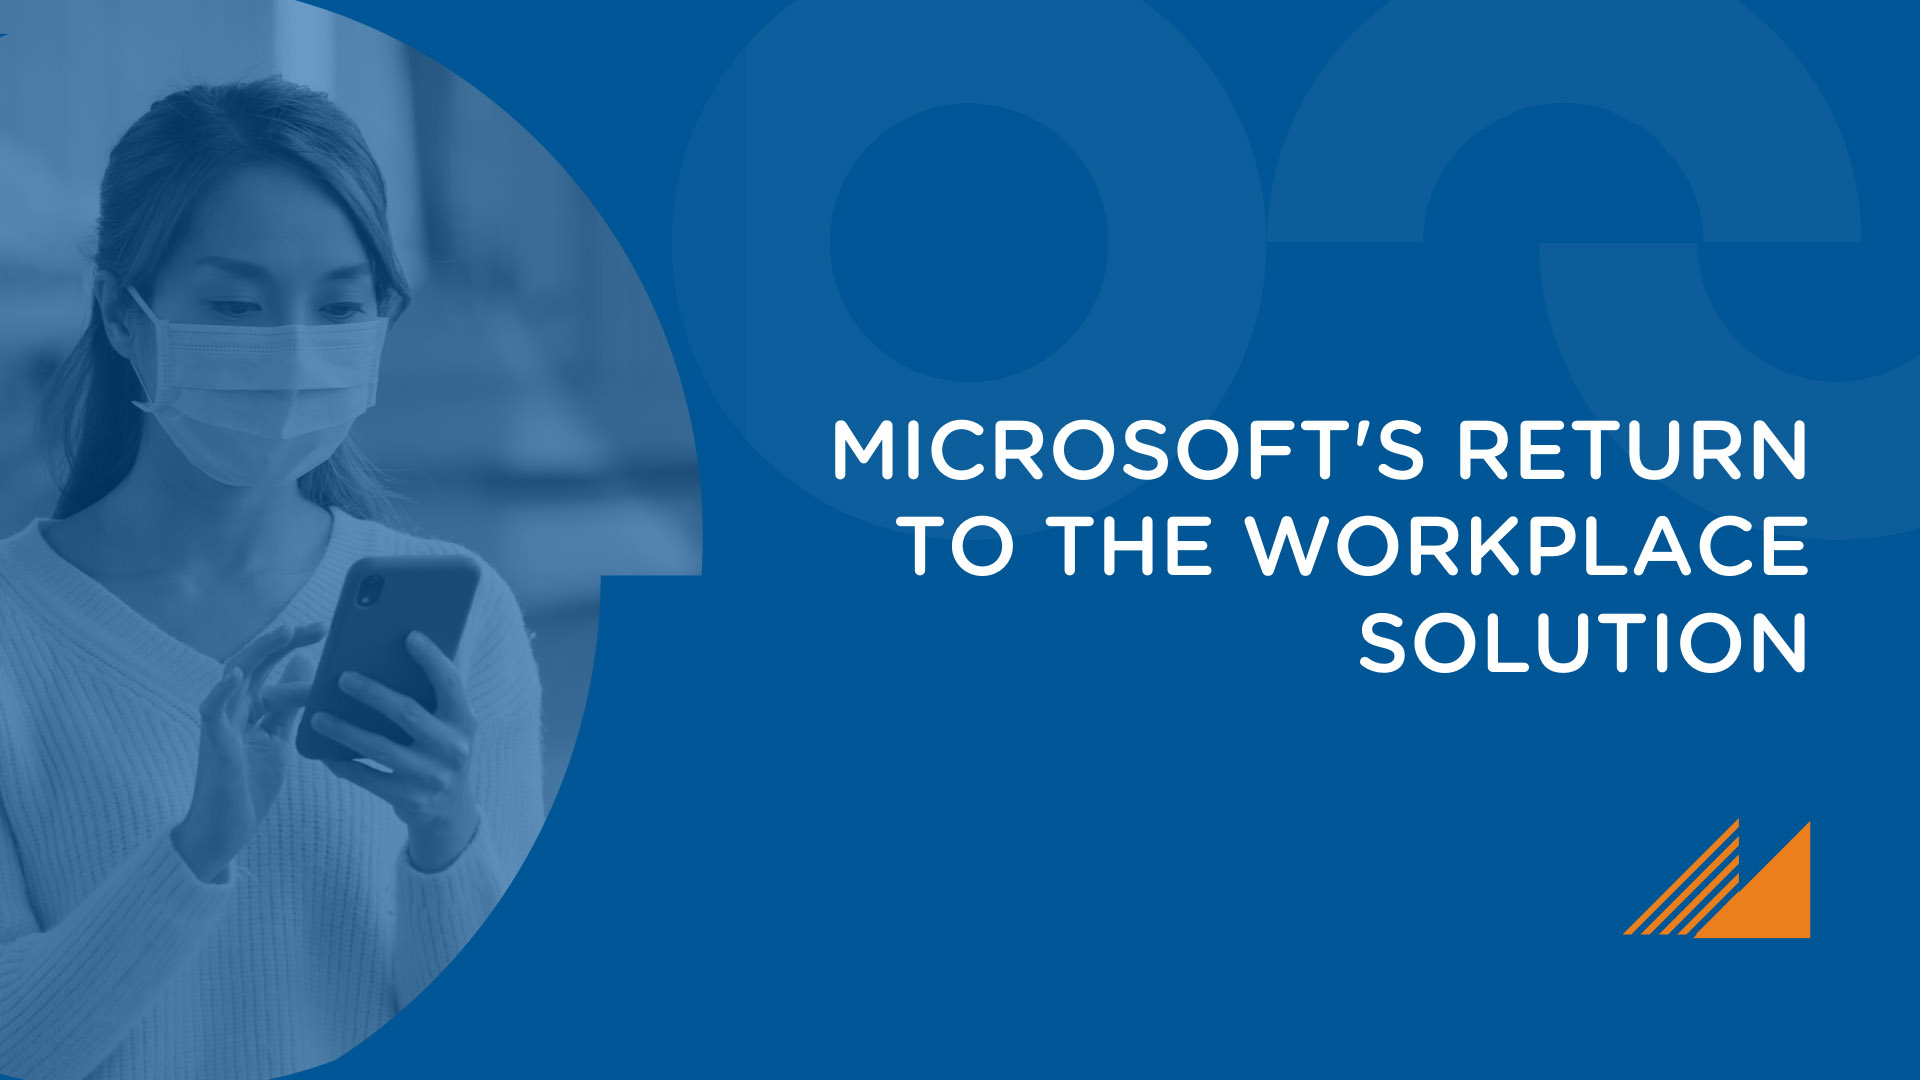 Microsoft’s Return to the Workplace Solution